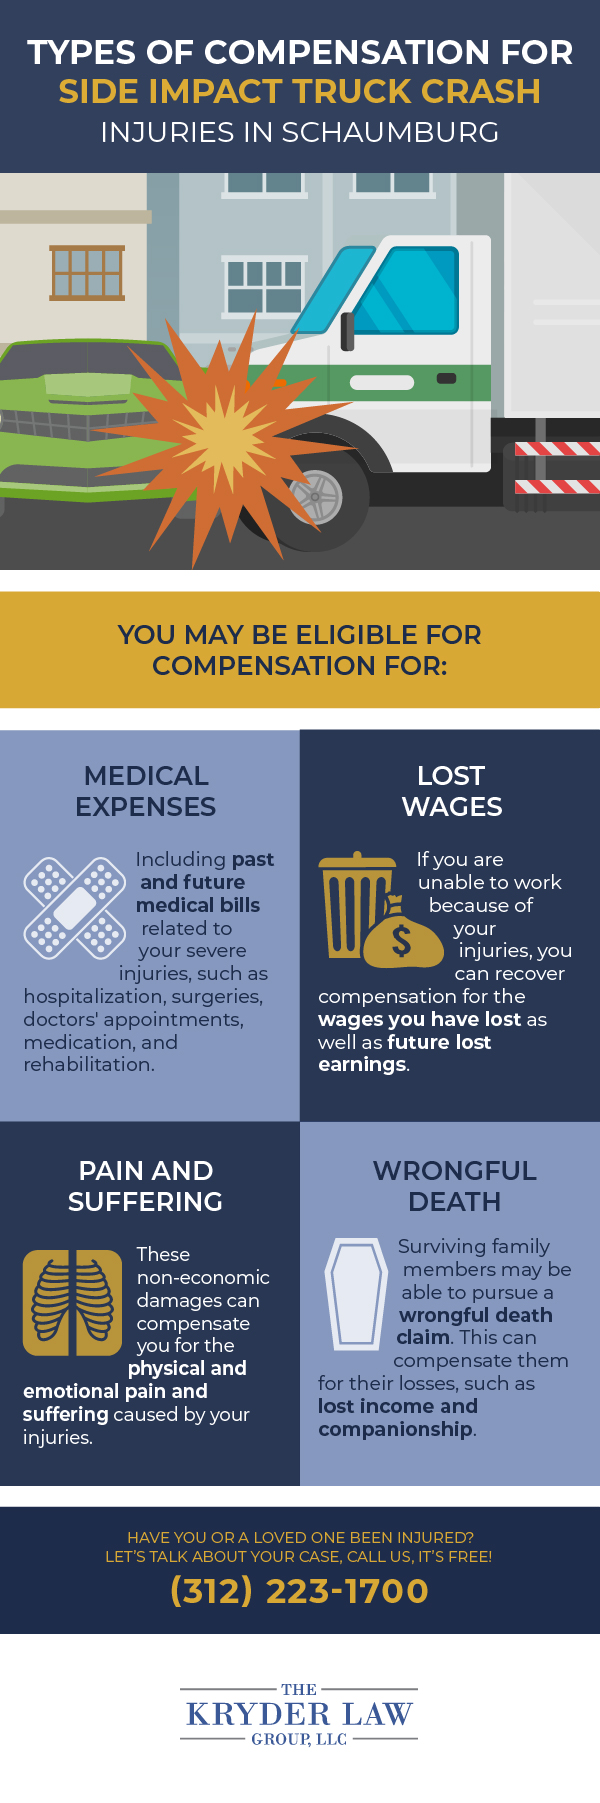 Types of Compensation for Side Impact Truck Crash Injuries in Schaumburg